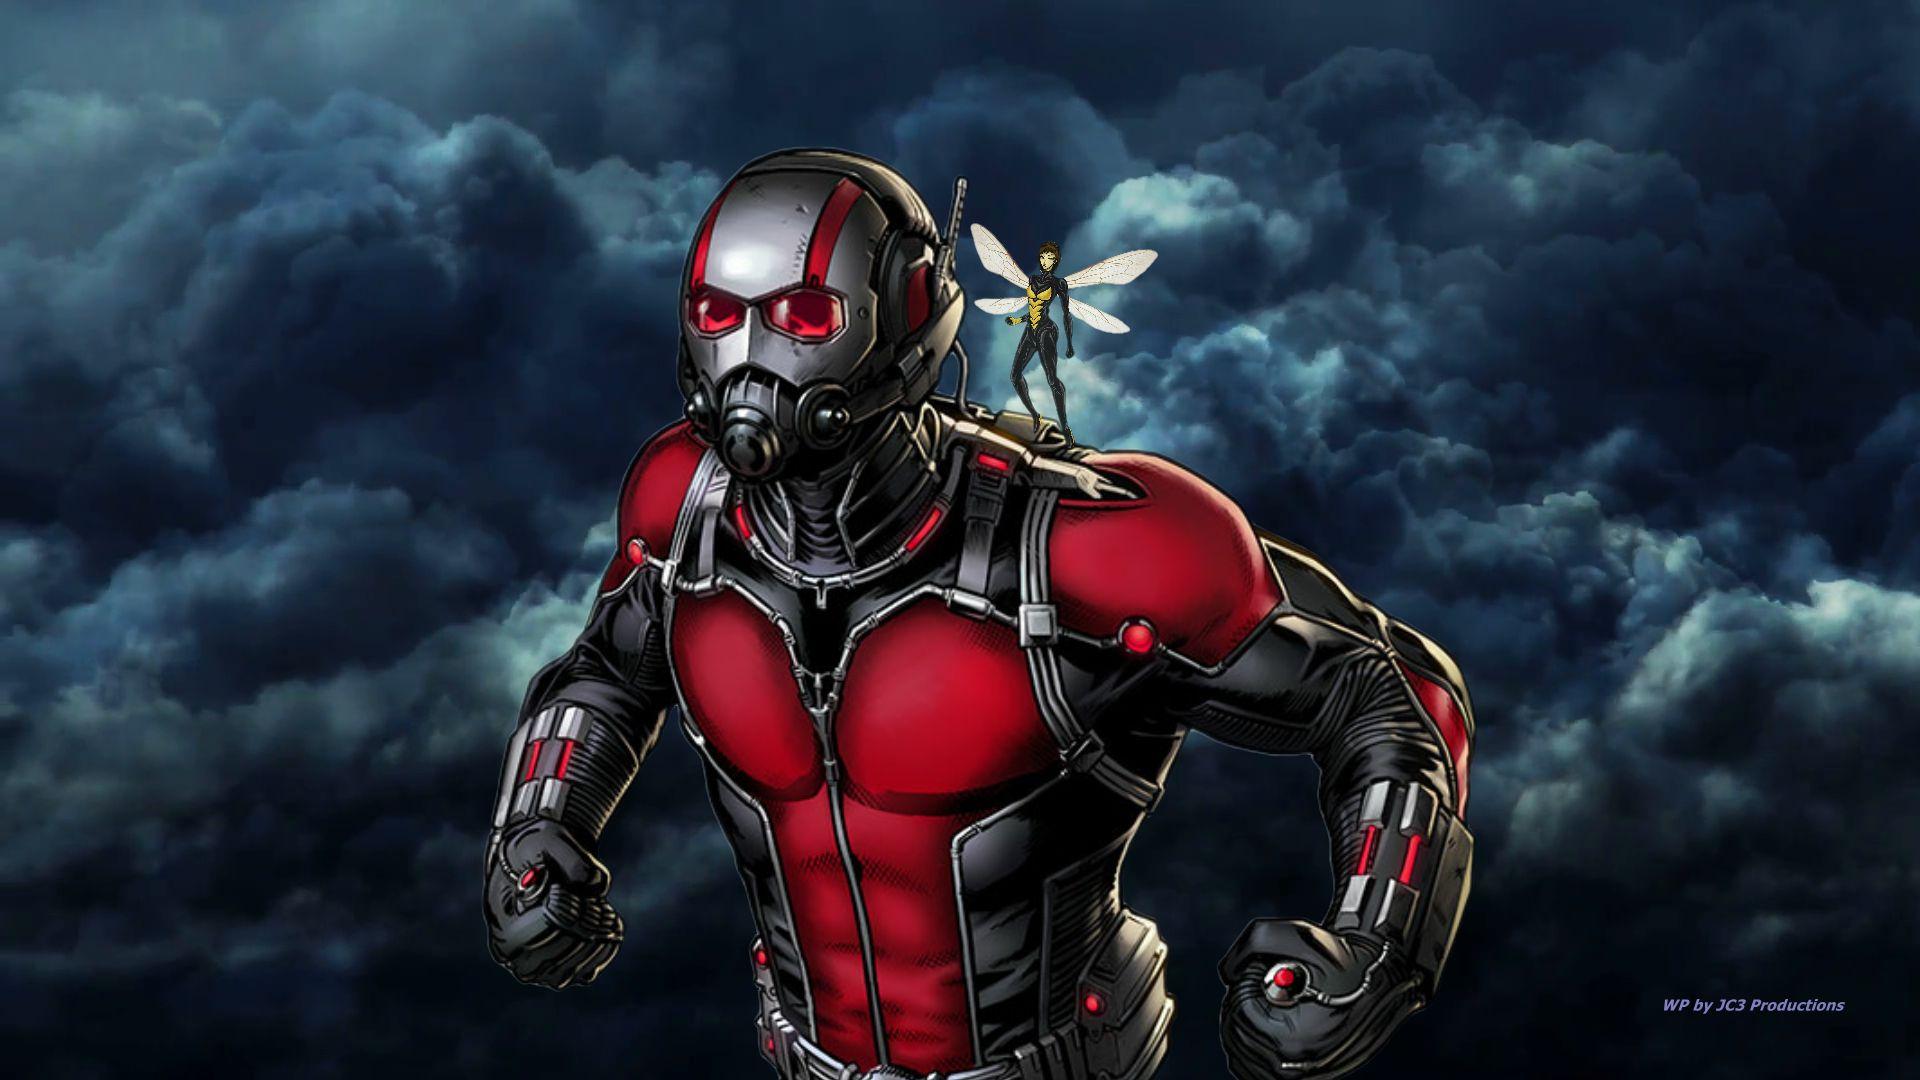 Ant Man Image ANT MAN The Wasp 2 HD Wallpaper And Background Photo